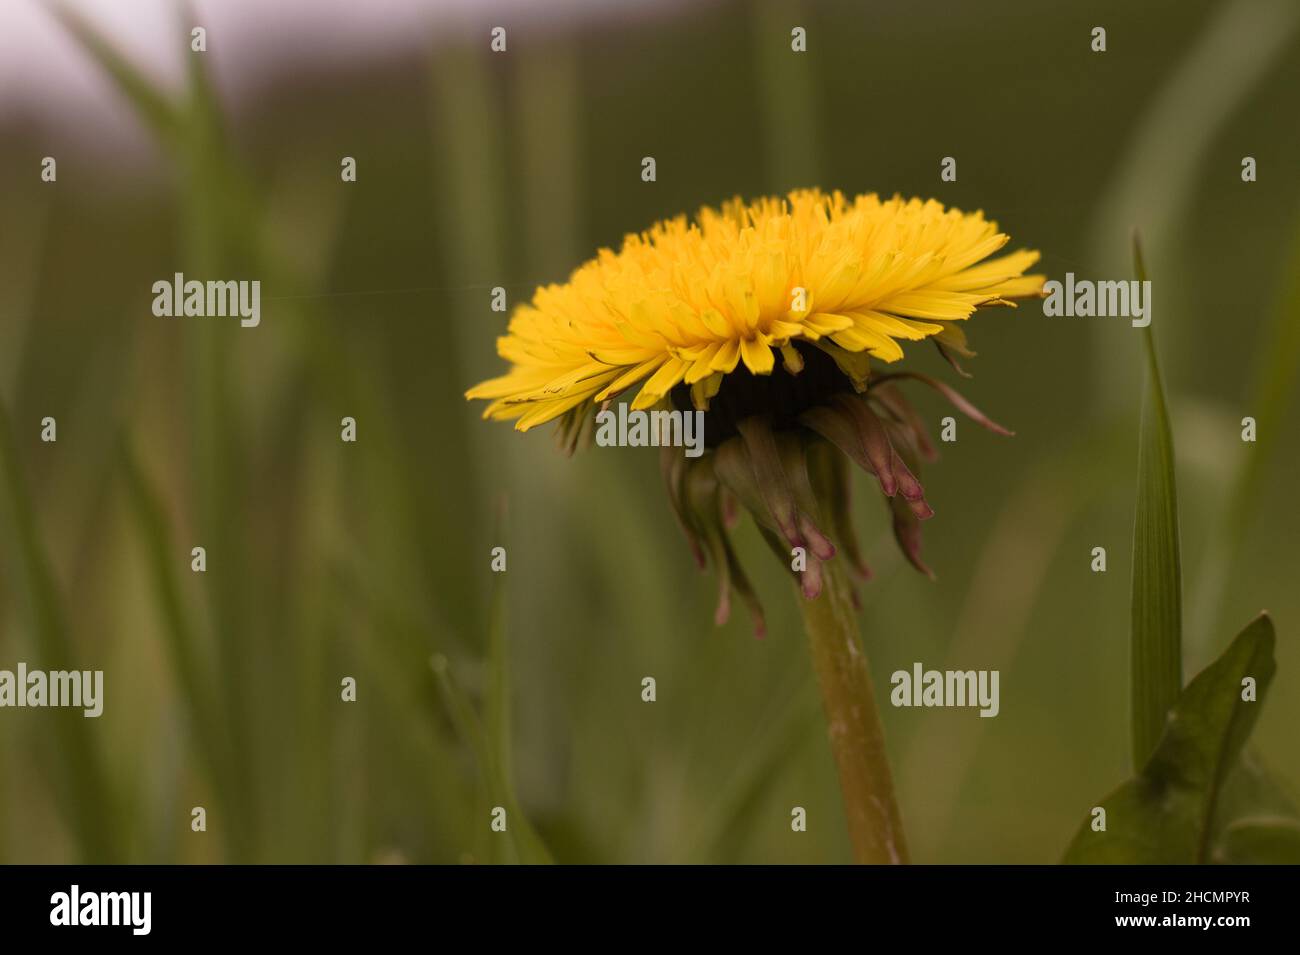 A yellow dandelion in the blurred natural background Stock Photo